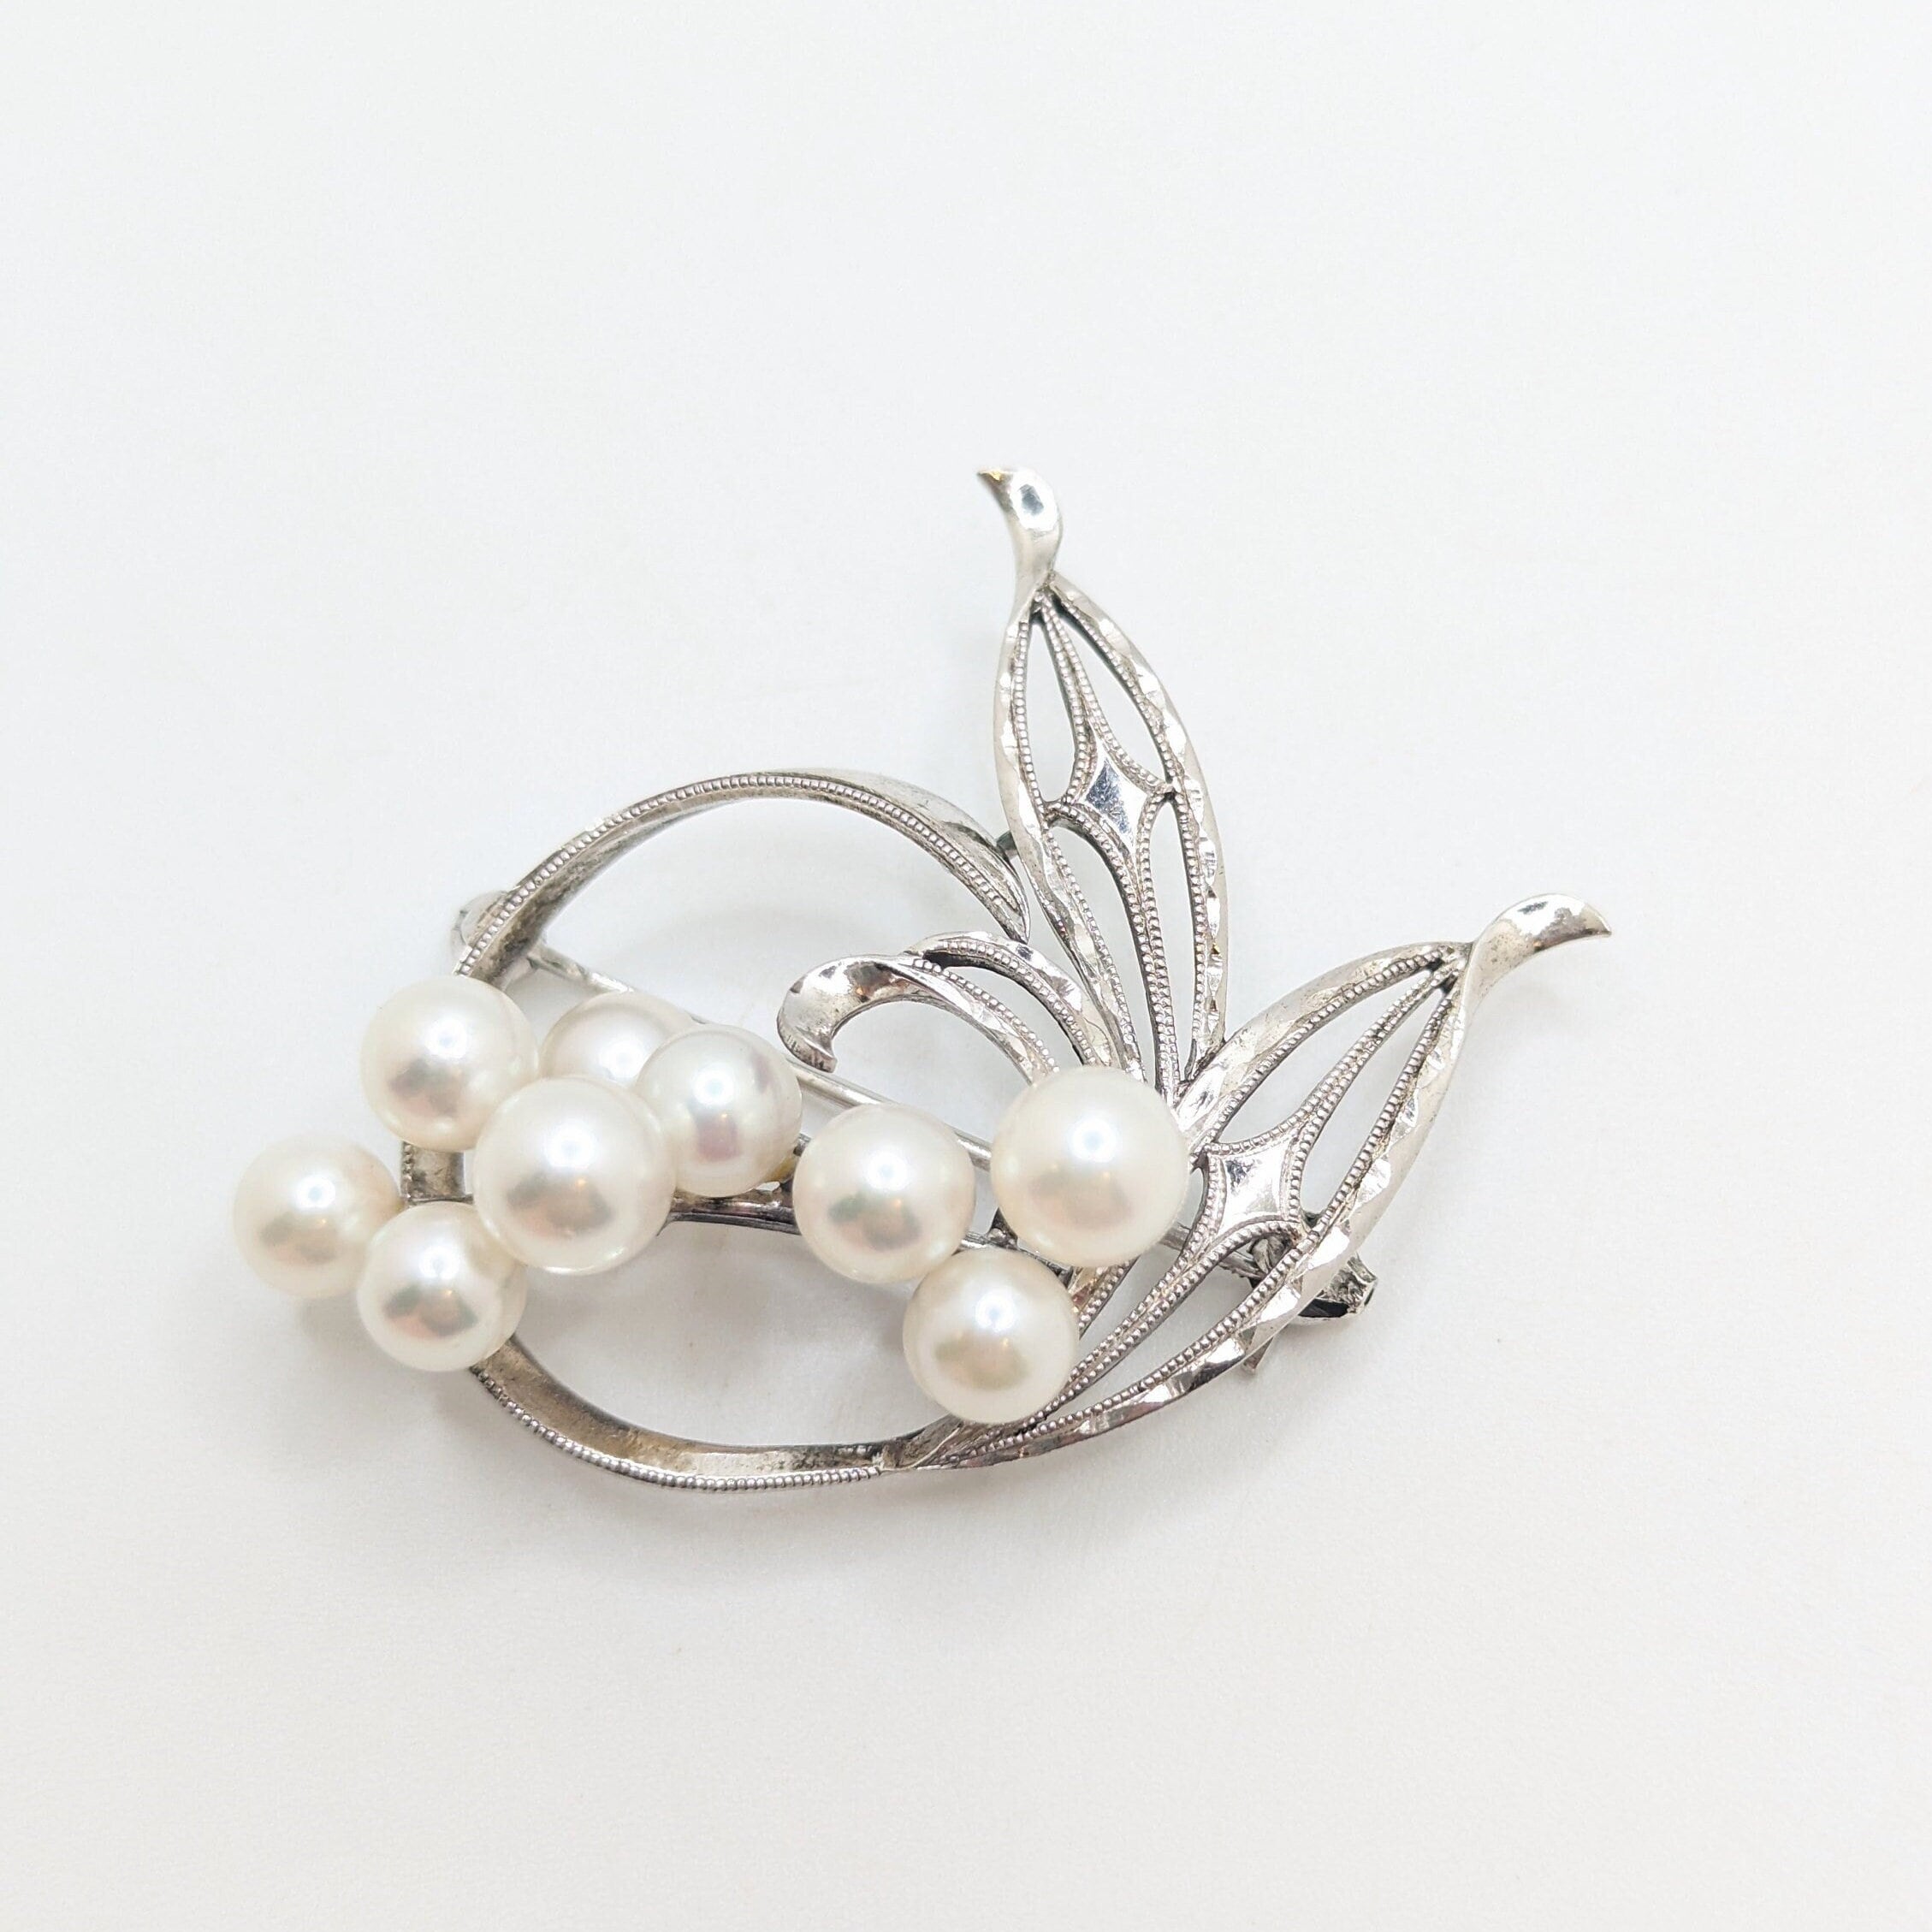 Vintage Mikimoto Pearl Brooch Sterling Silver Lapel Pin Ginza